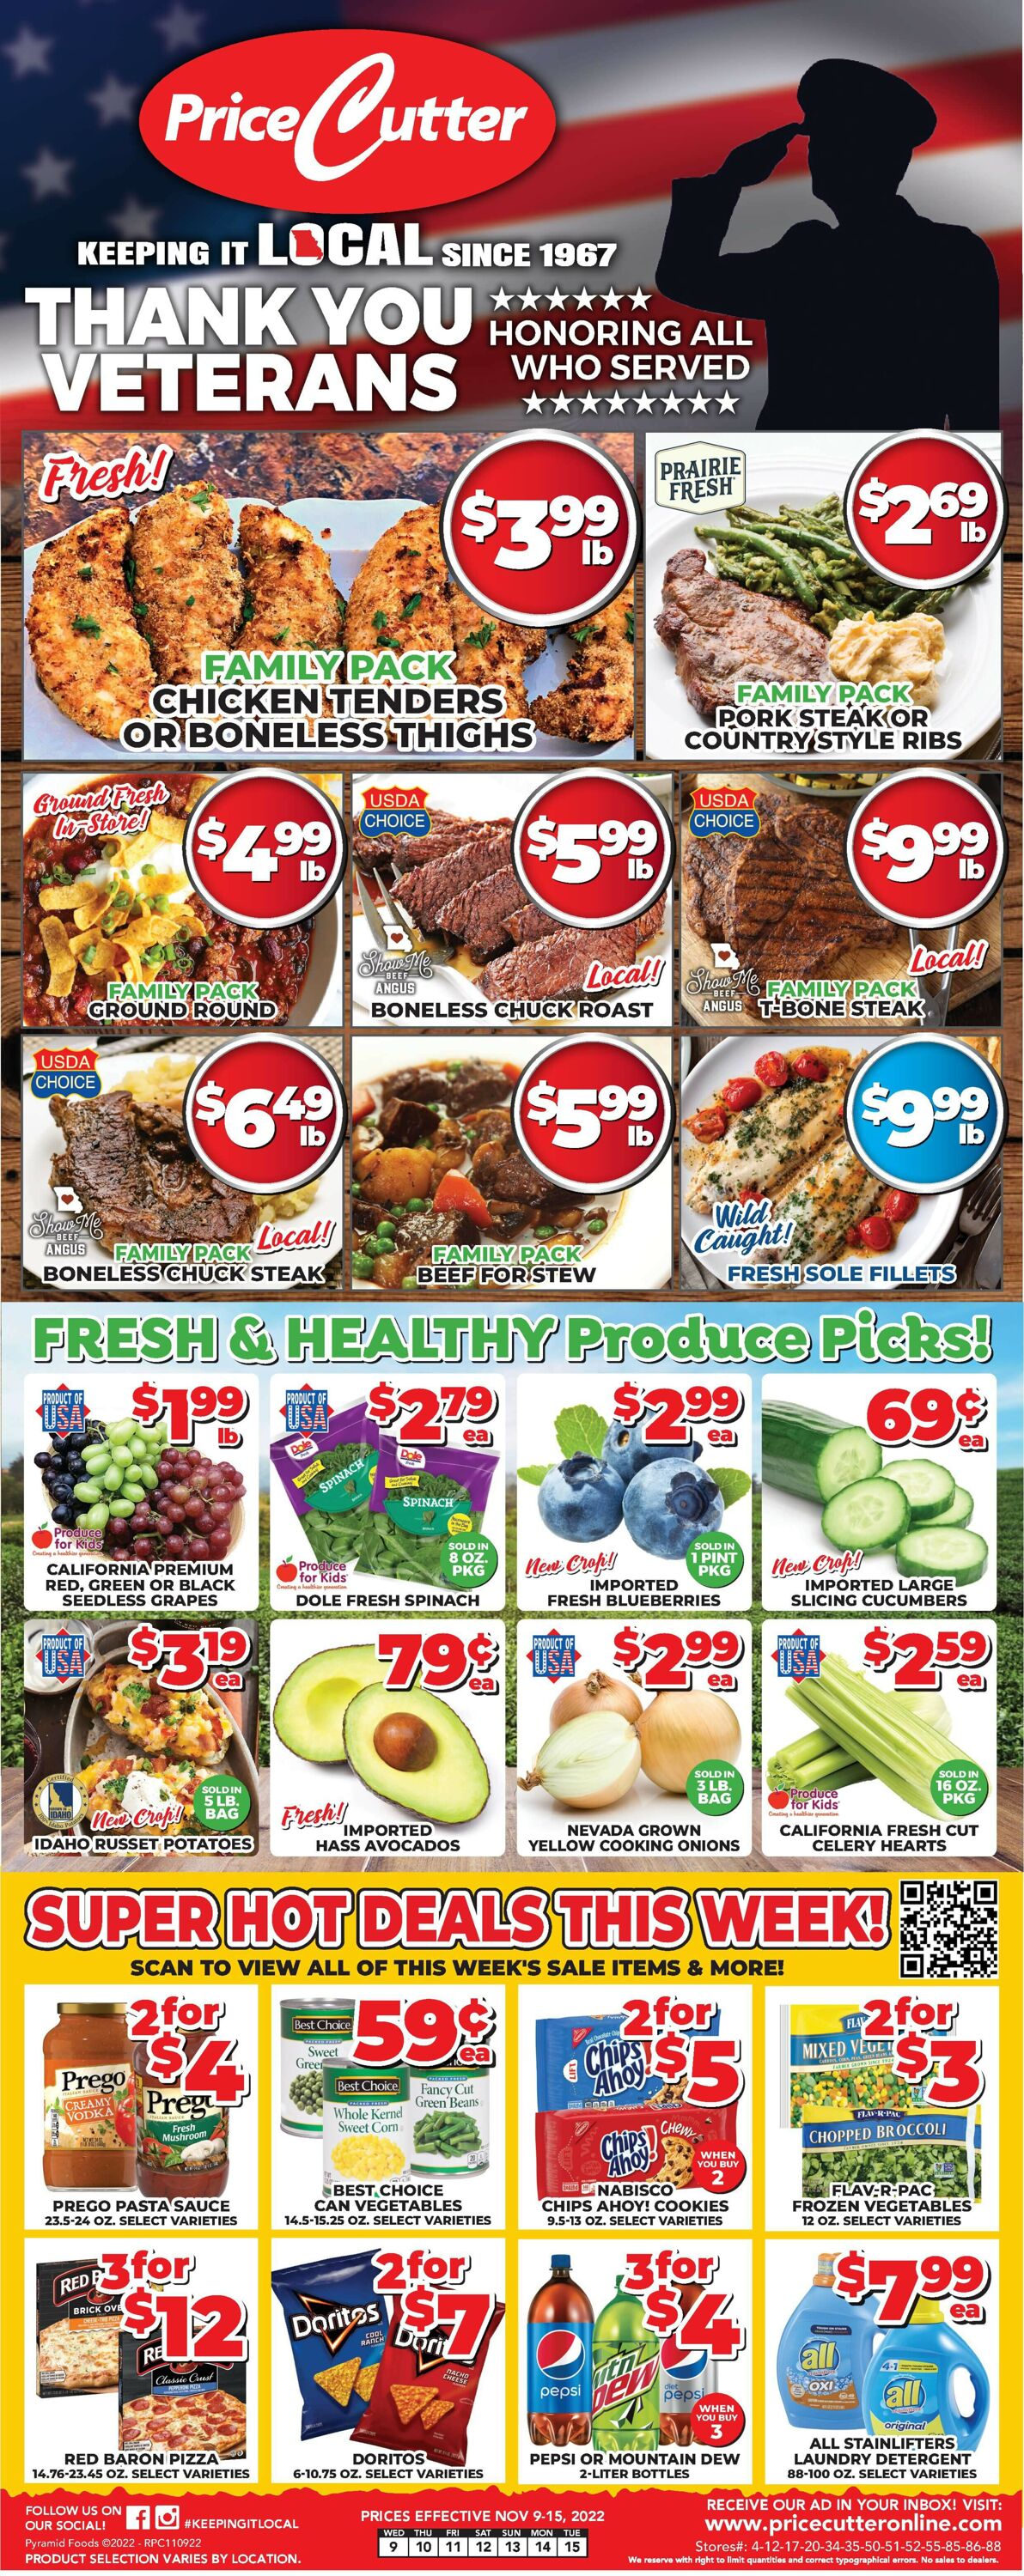 Price Cutter Weekly Ad Circular - valid 11/09-11/15/2022